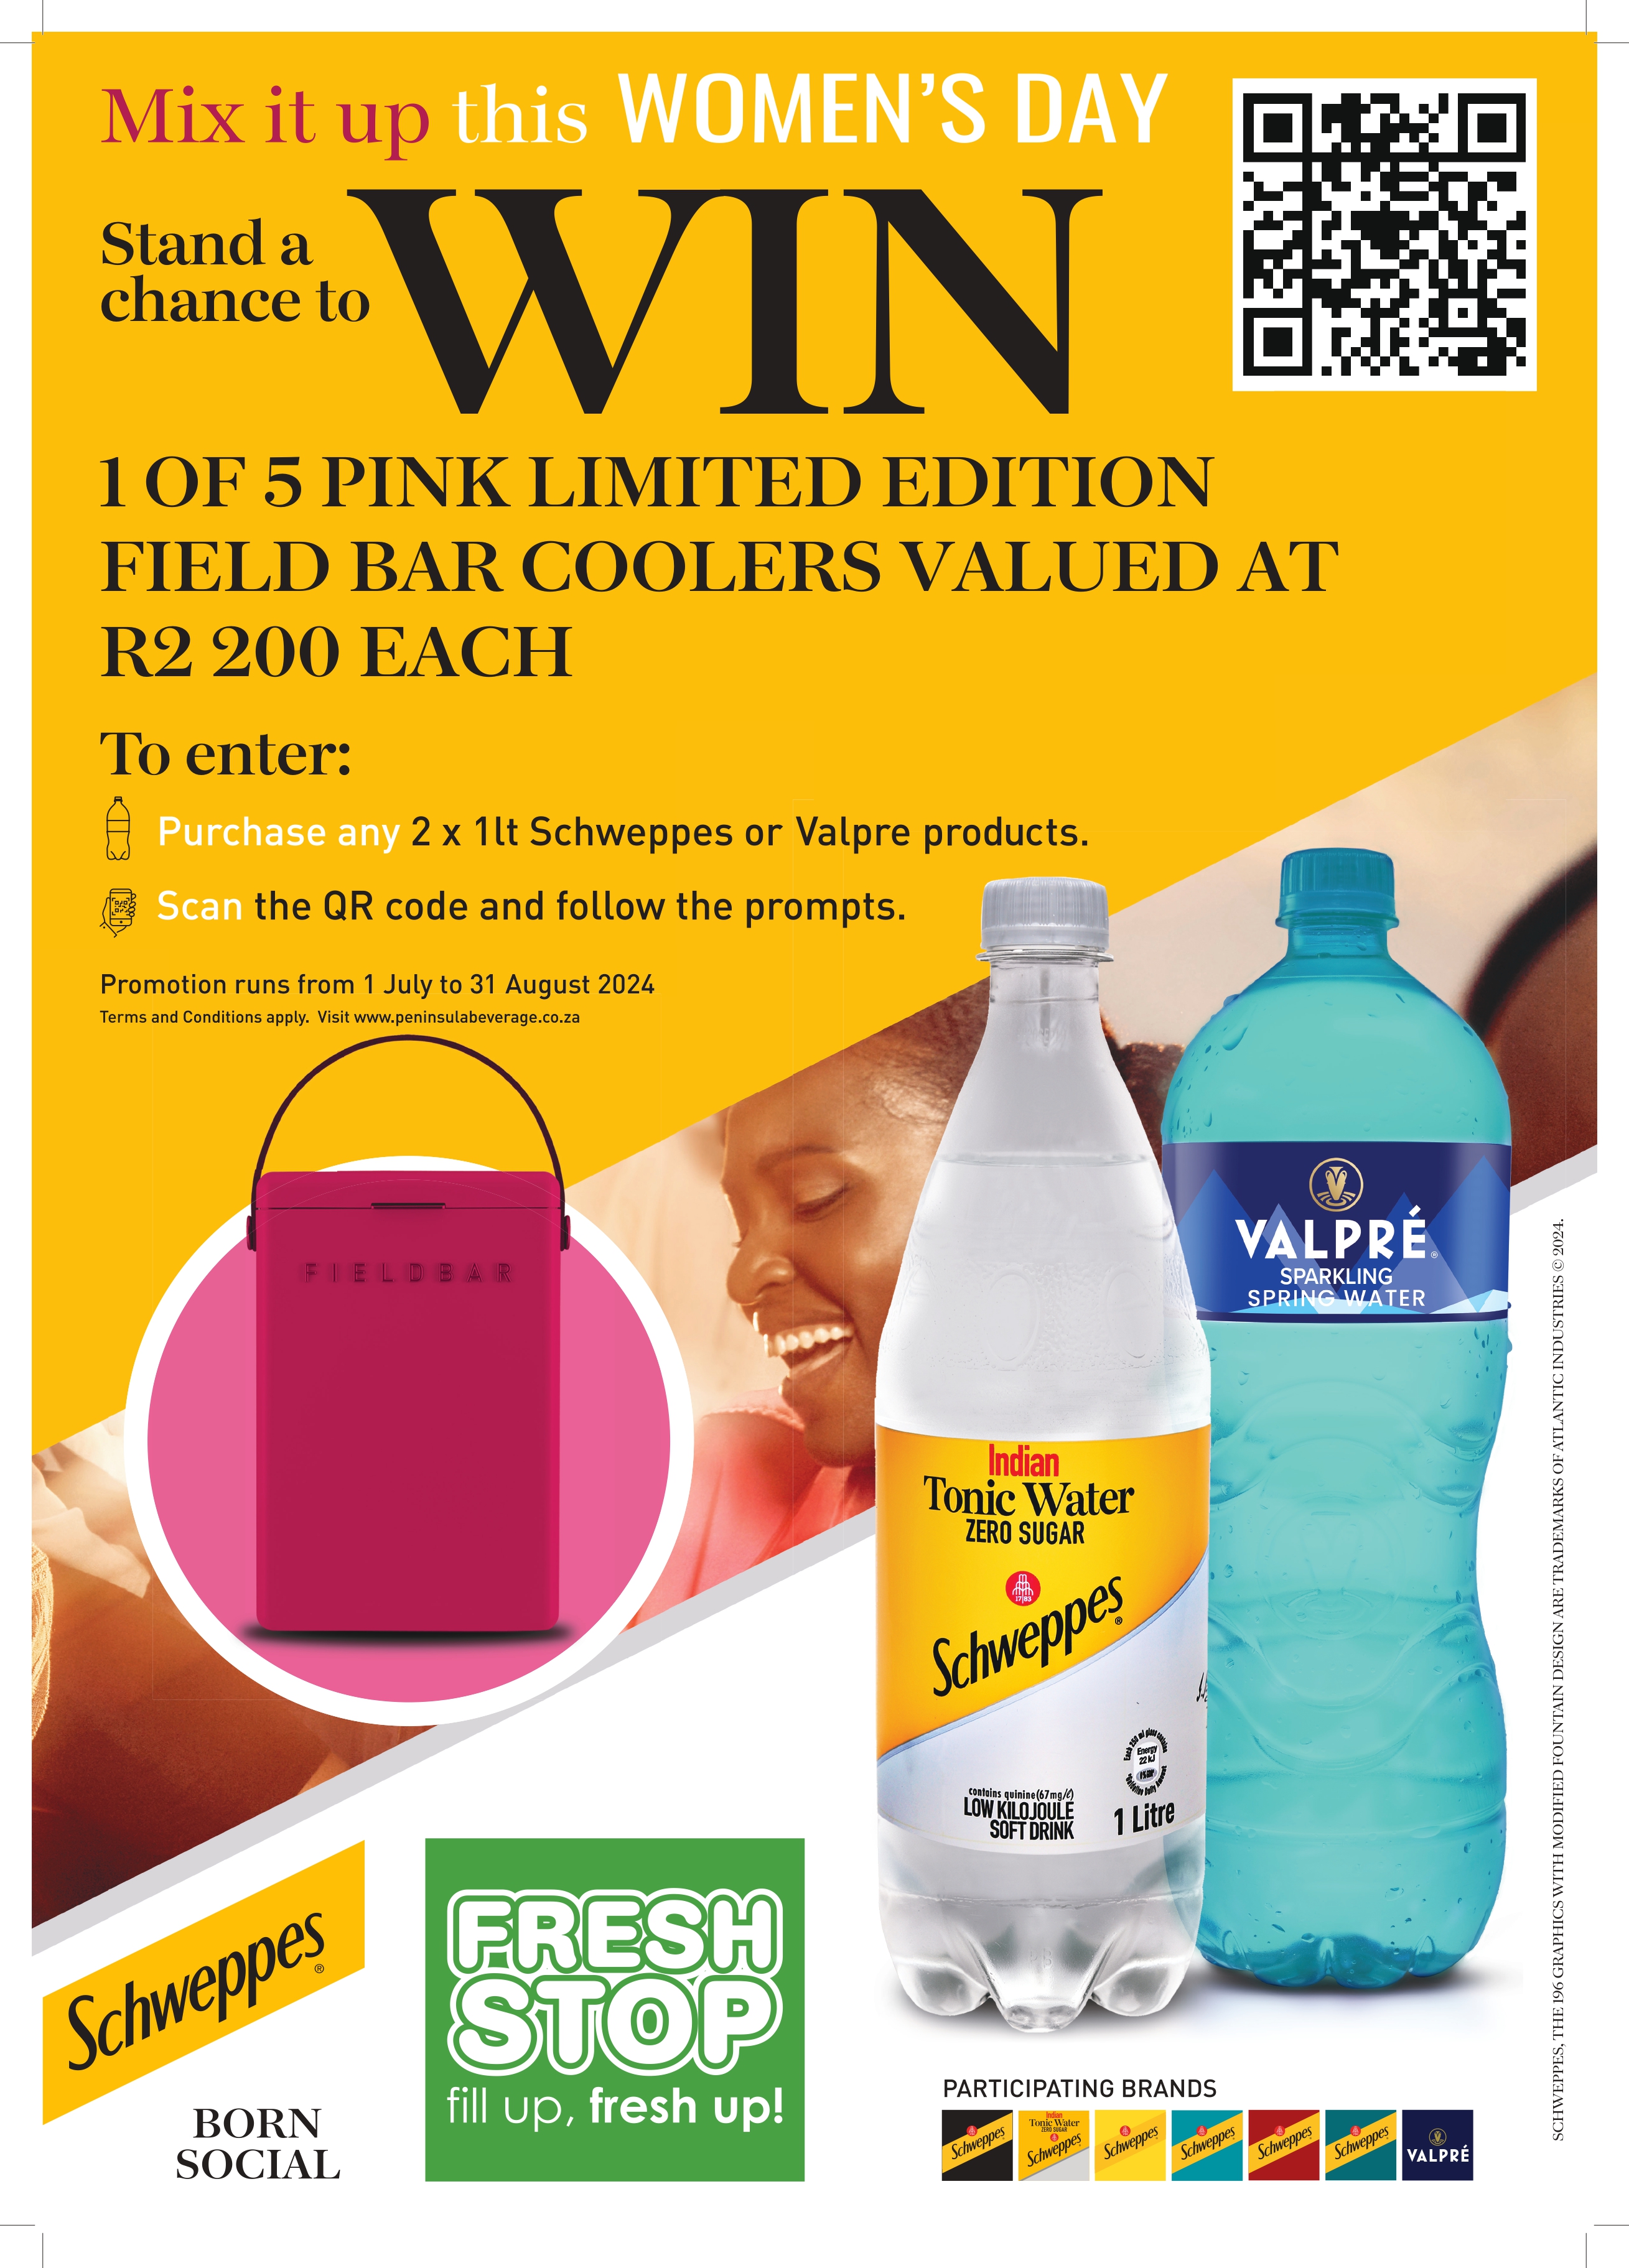 Purchase any 2x 1L Schweppes or Valpre Products to stand a chance to win 1 of 5 Pink Limited Edition Field Bar Coolers valued at R2 200.